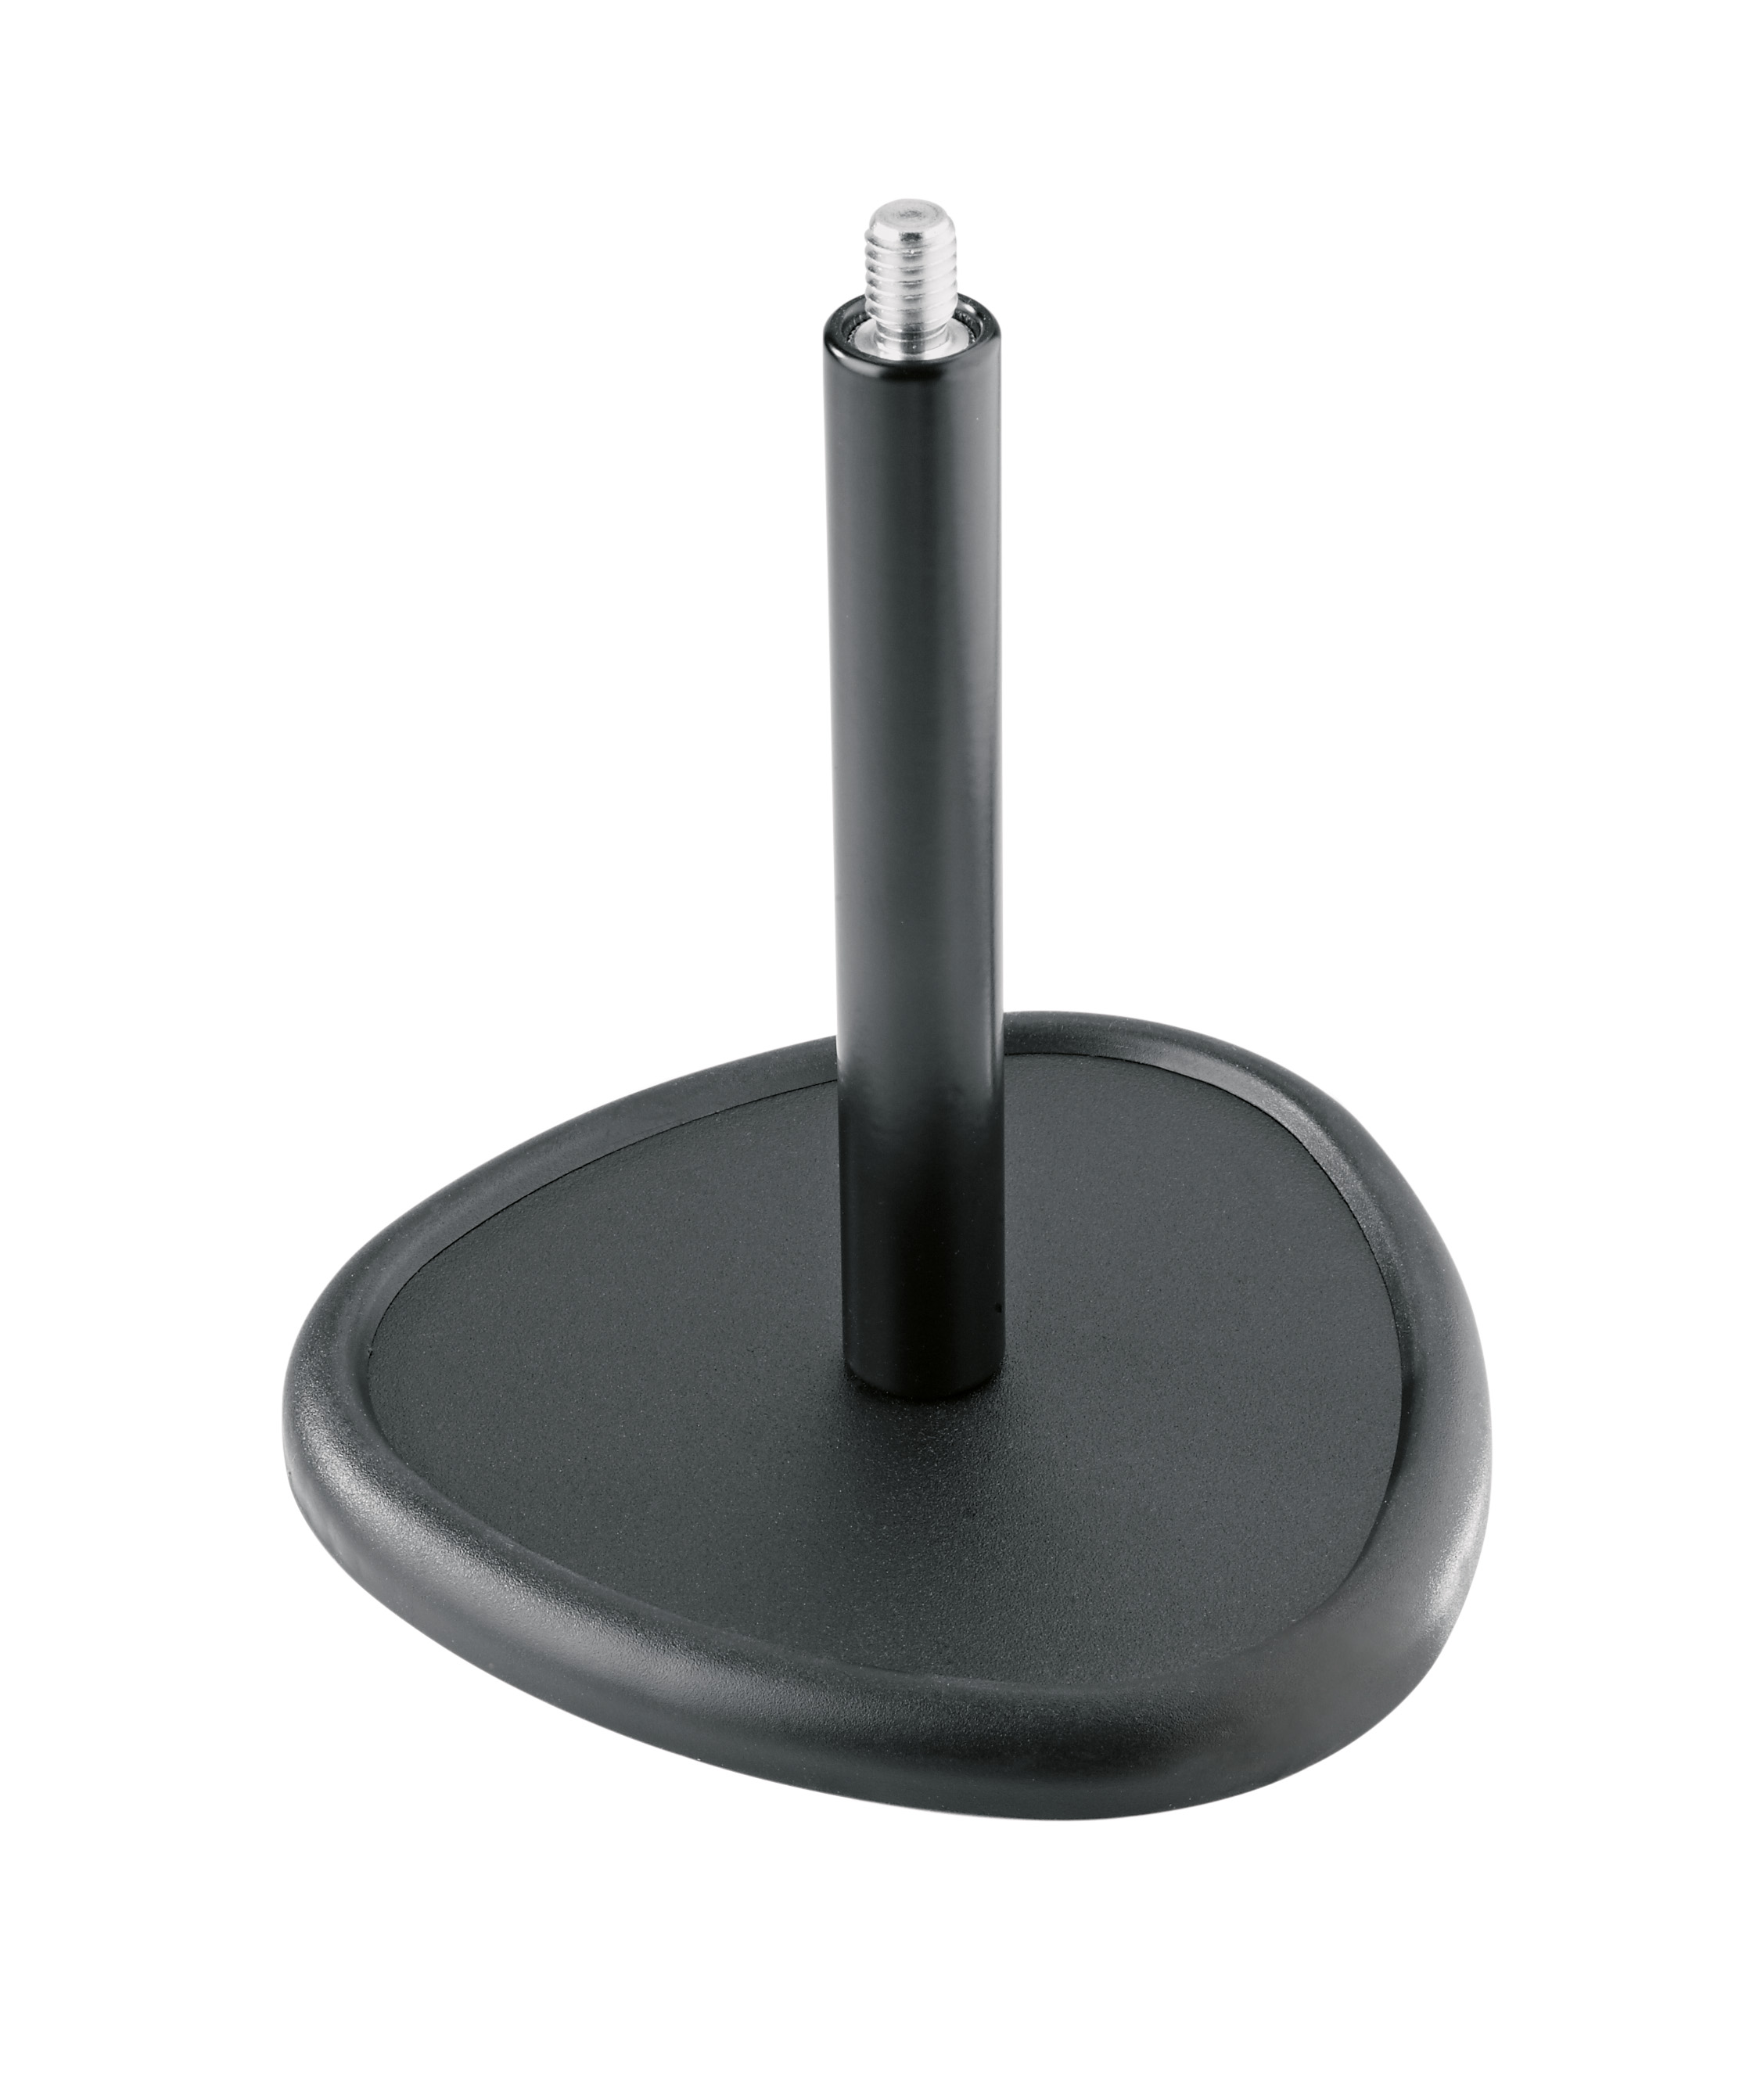 23250 pied microphone de table Microphone stand K&m